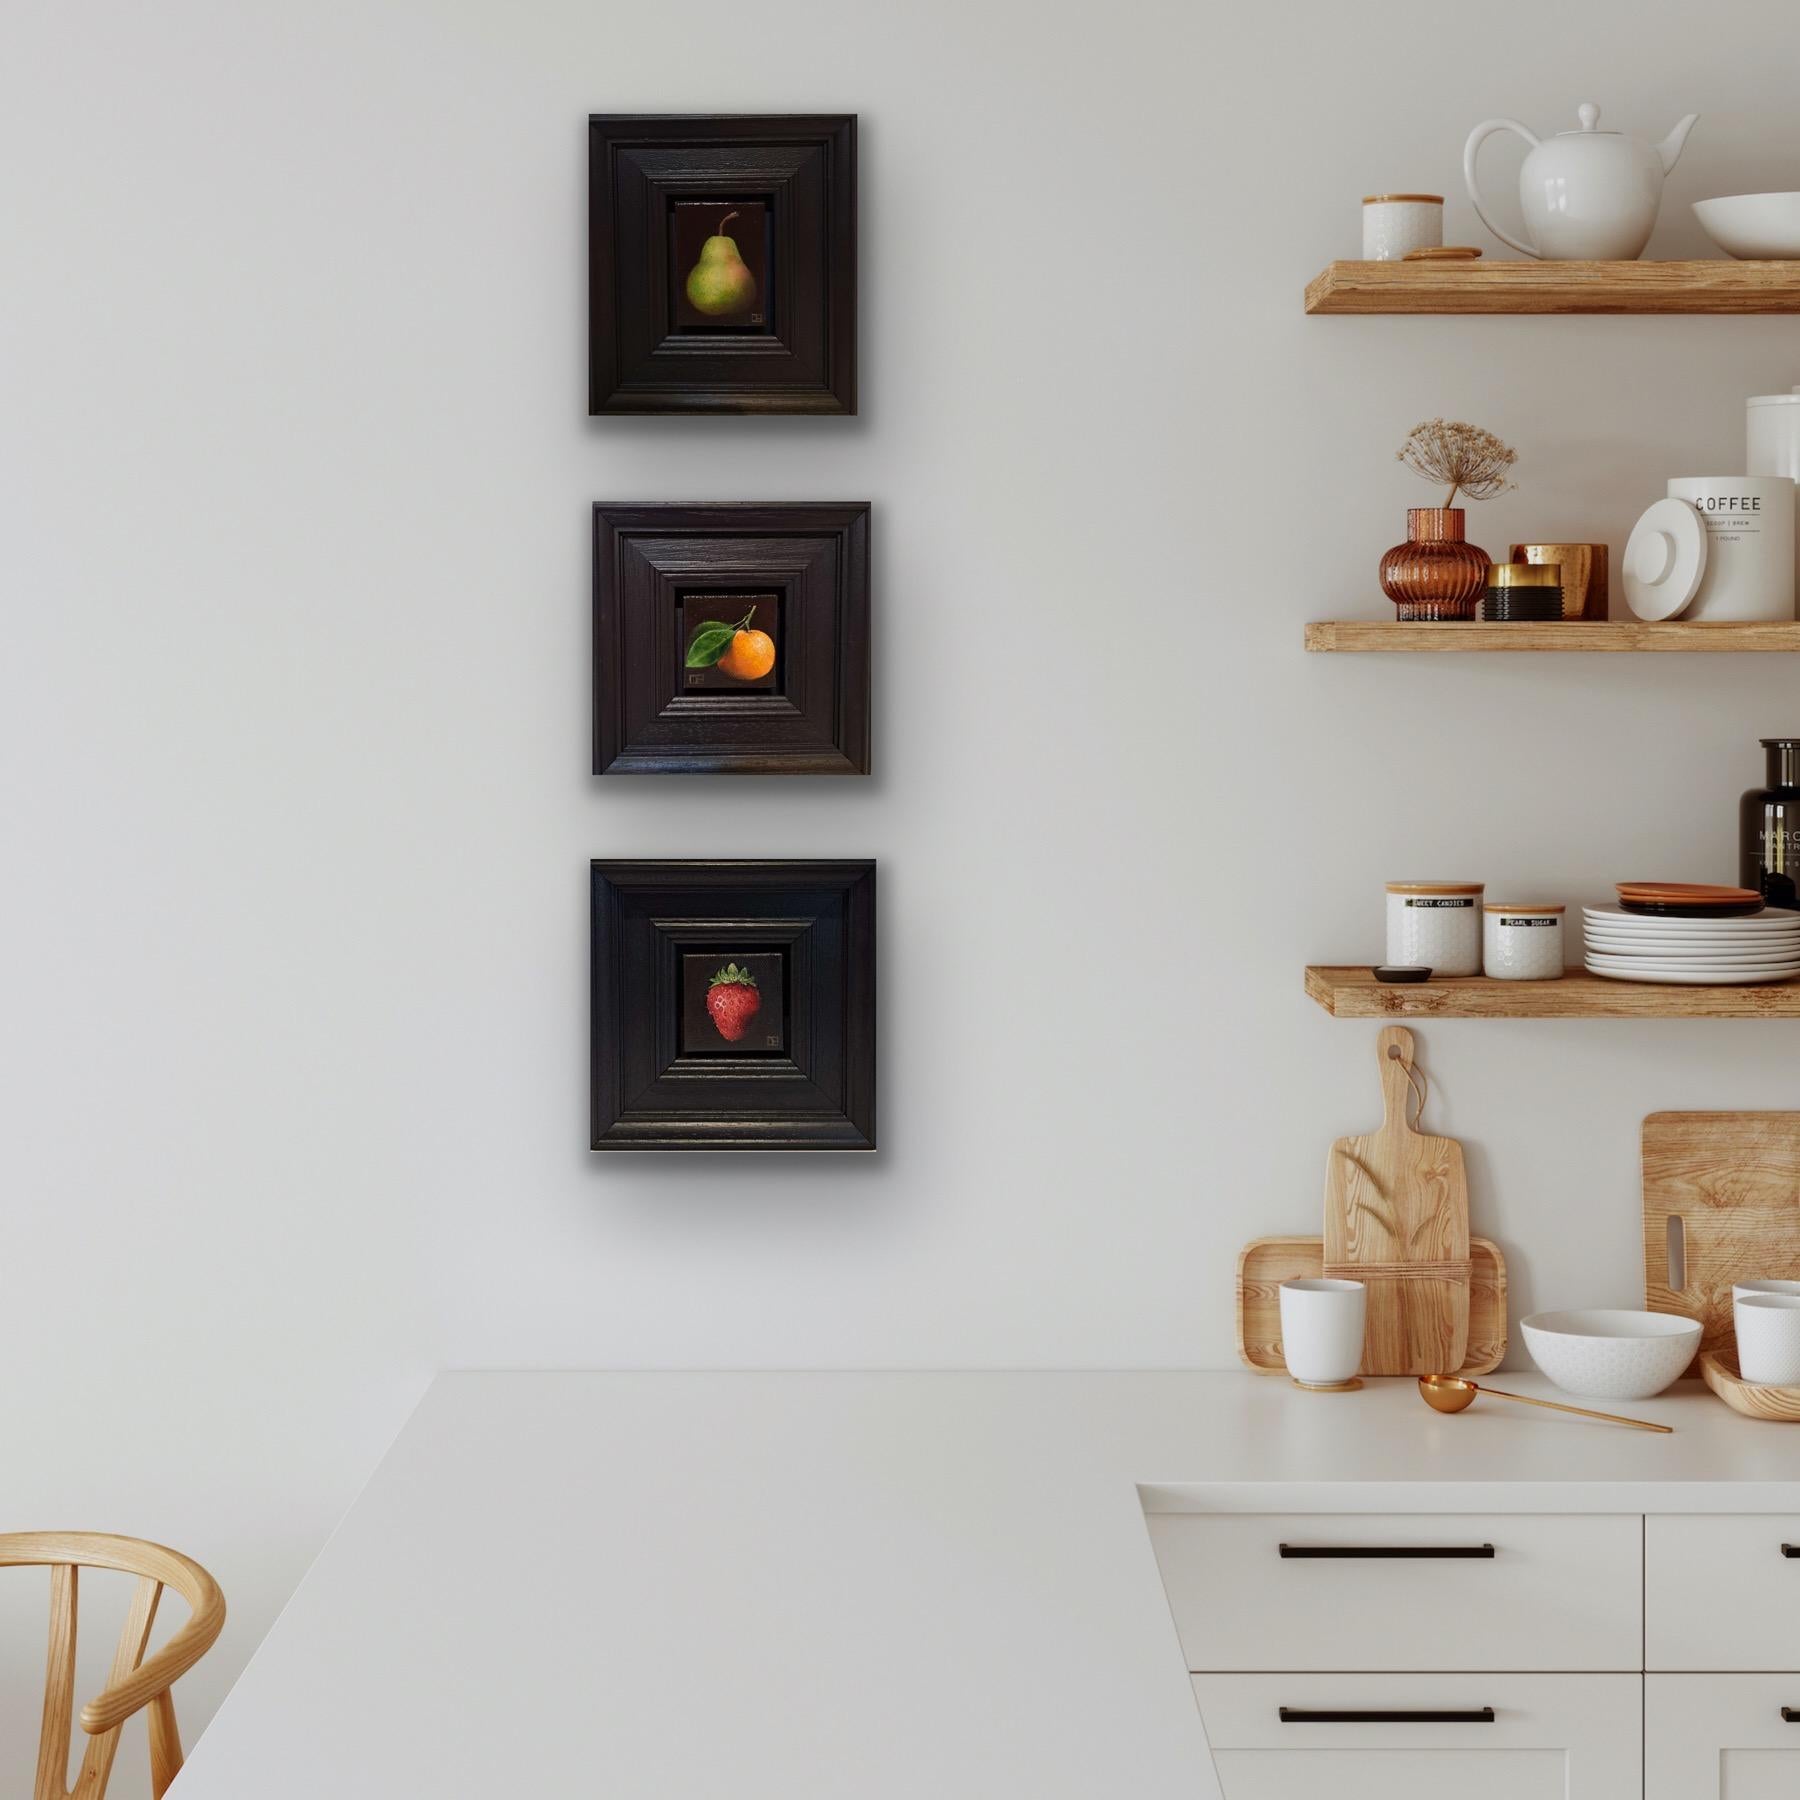 Pocket Bright Clementine is an original oil painting by Dani Humberstone as part of her Pocket Painting series featuring small scale realistic oil paintings, with a nod to baroque still life painting. The paintings are set in a black wood layered